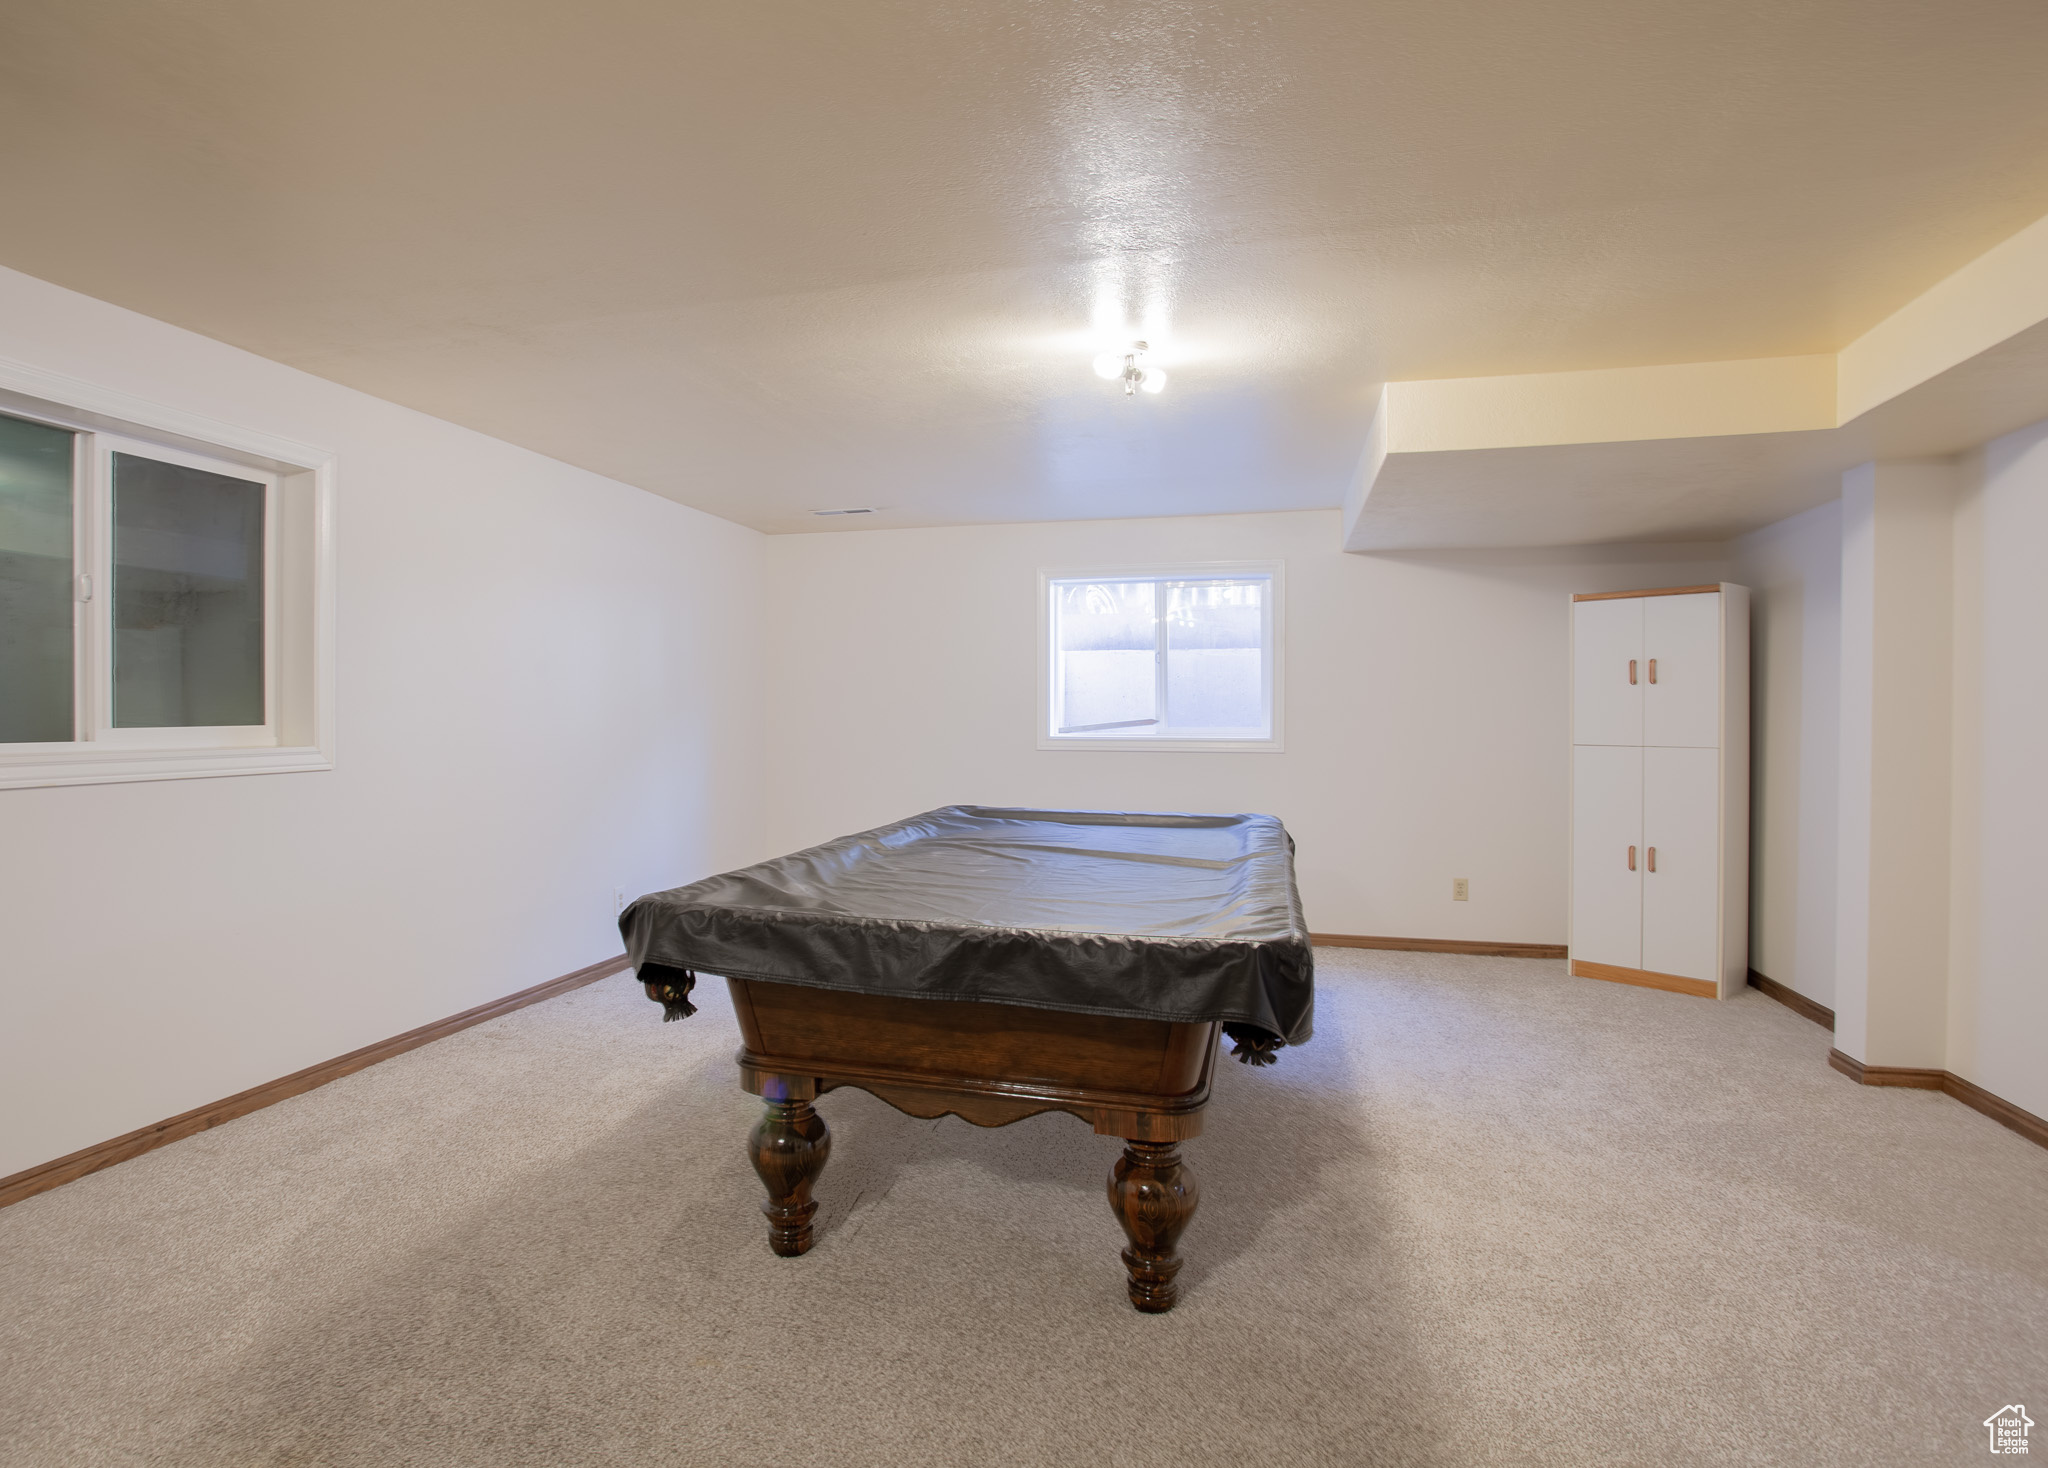 Game room with light colored carpet and pool table